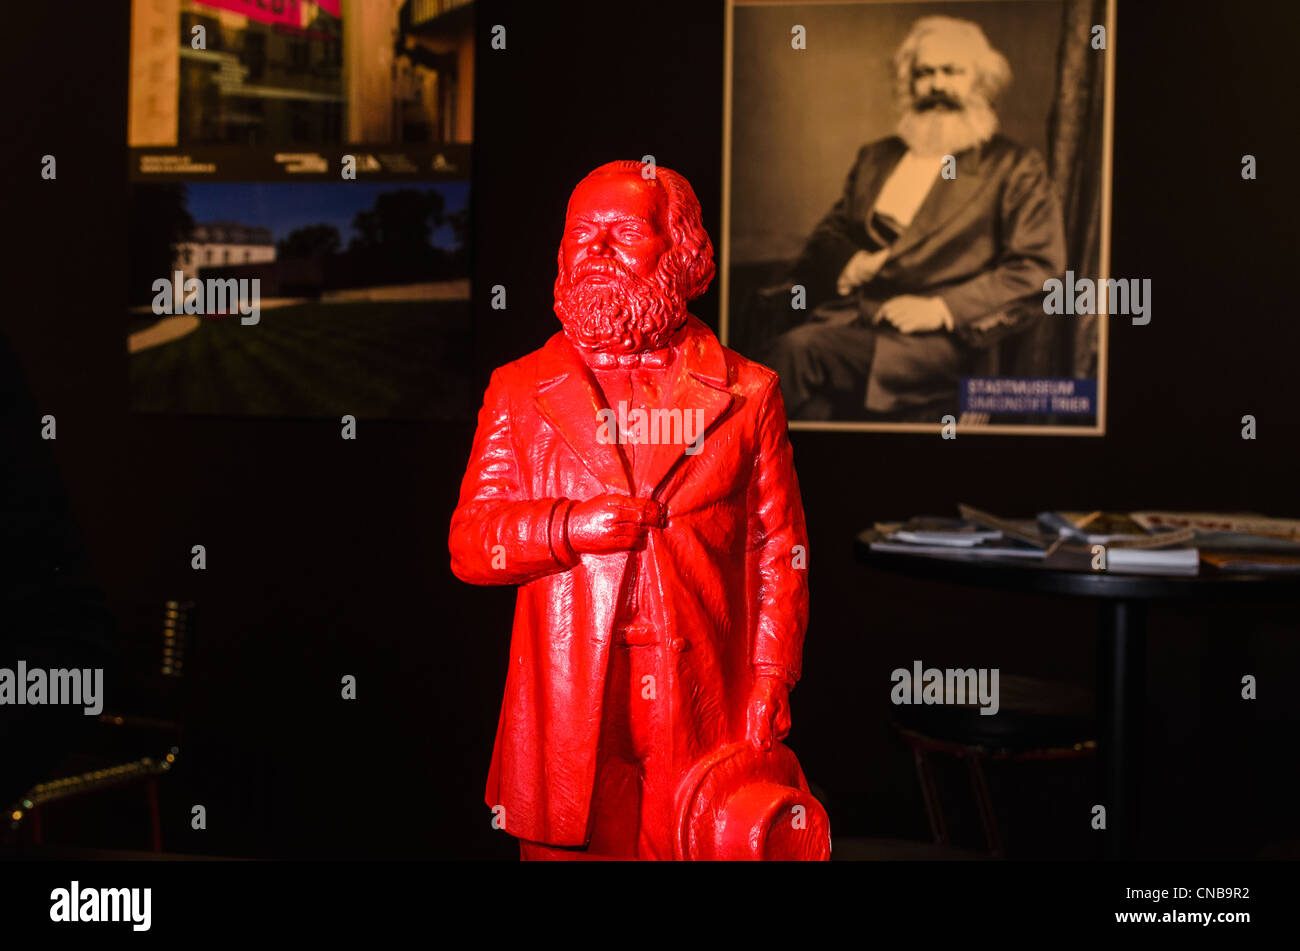 ITB 2012, Internationale Tourismus Boerse, International Tourism Fair Karl Marx statue at City of Trier, Germany Stock Photo